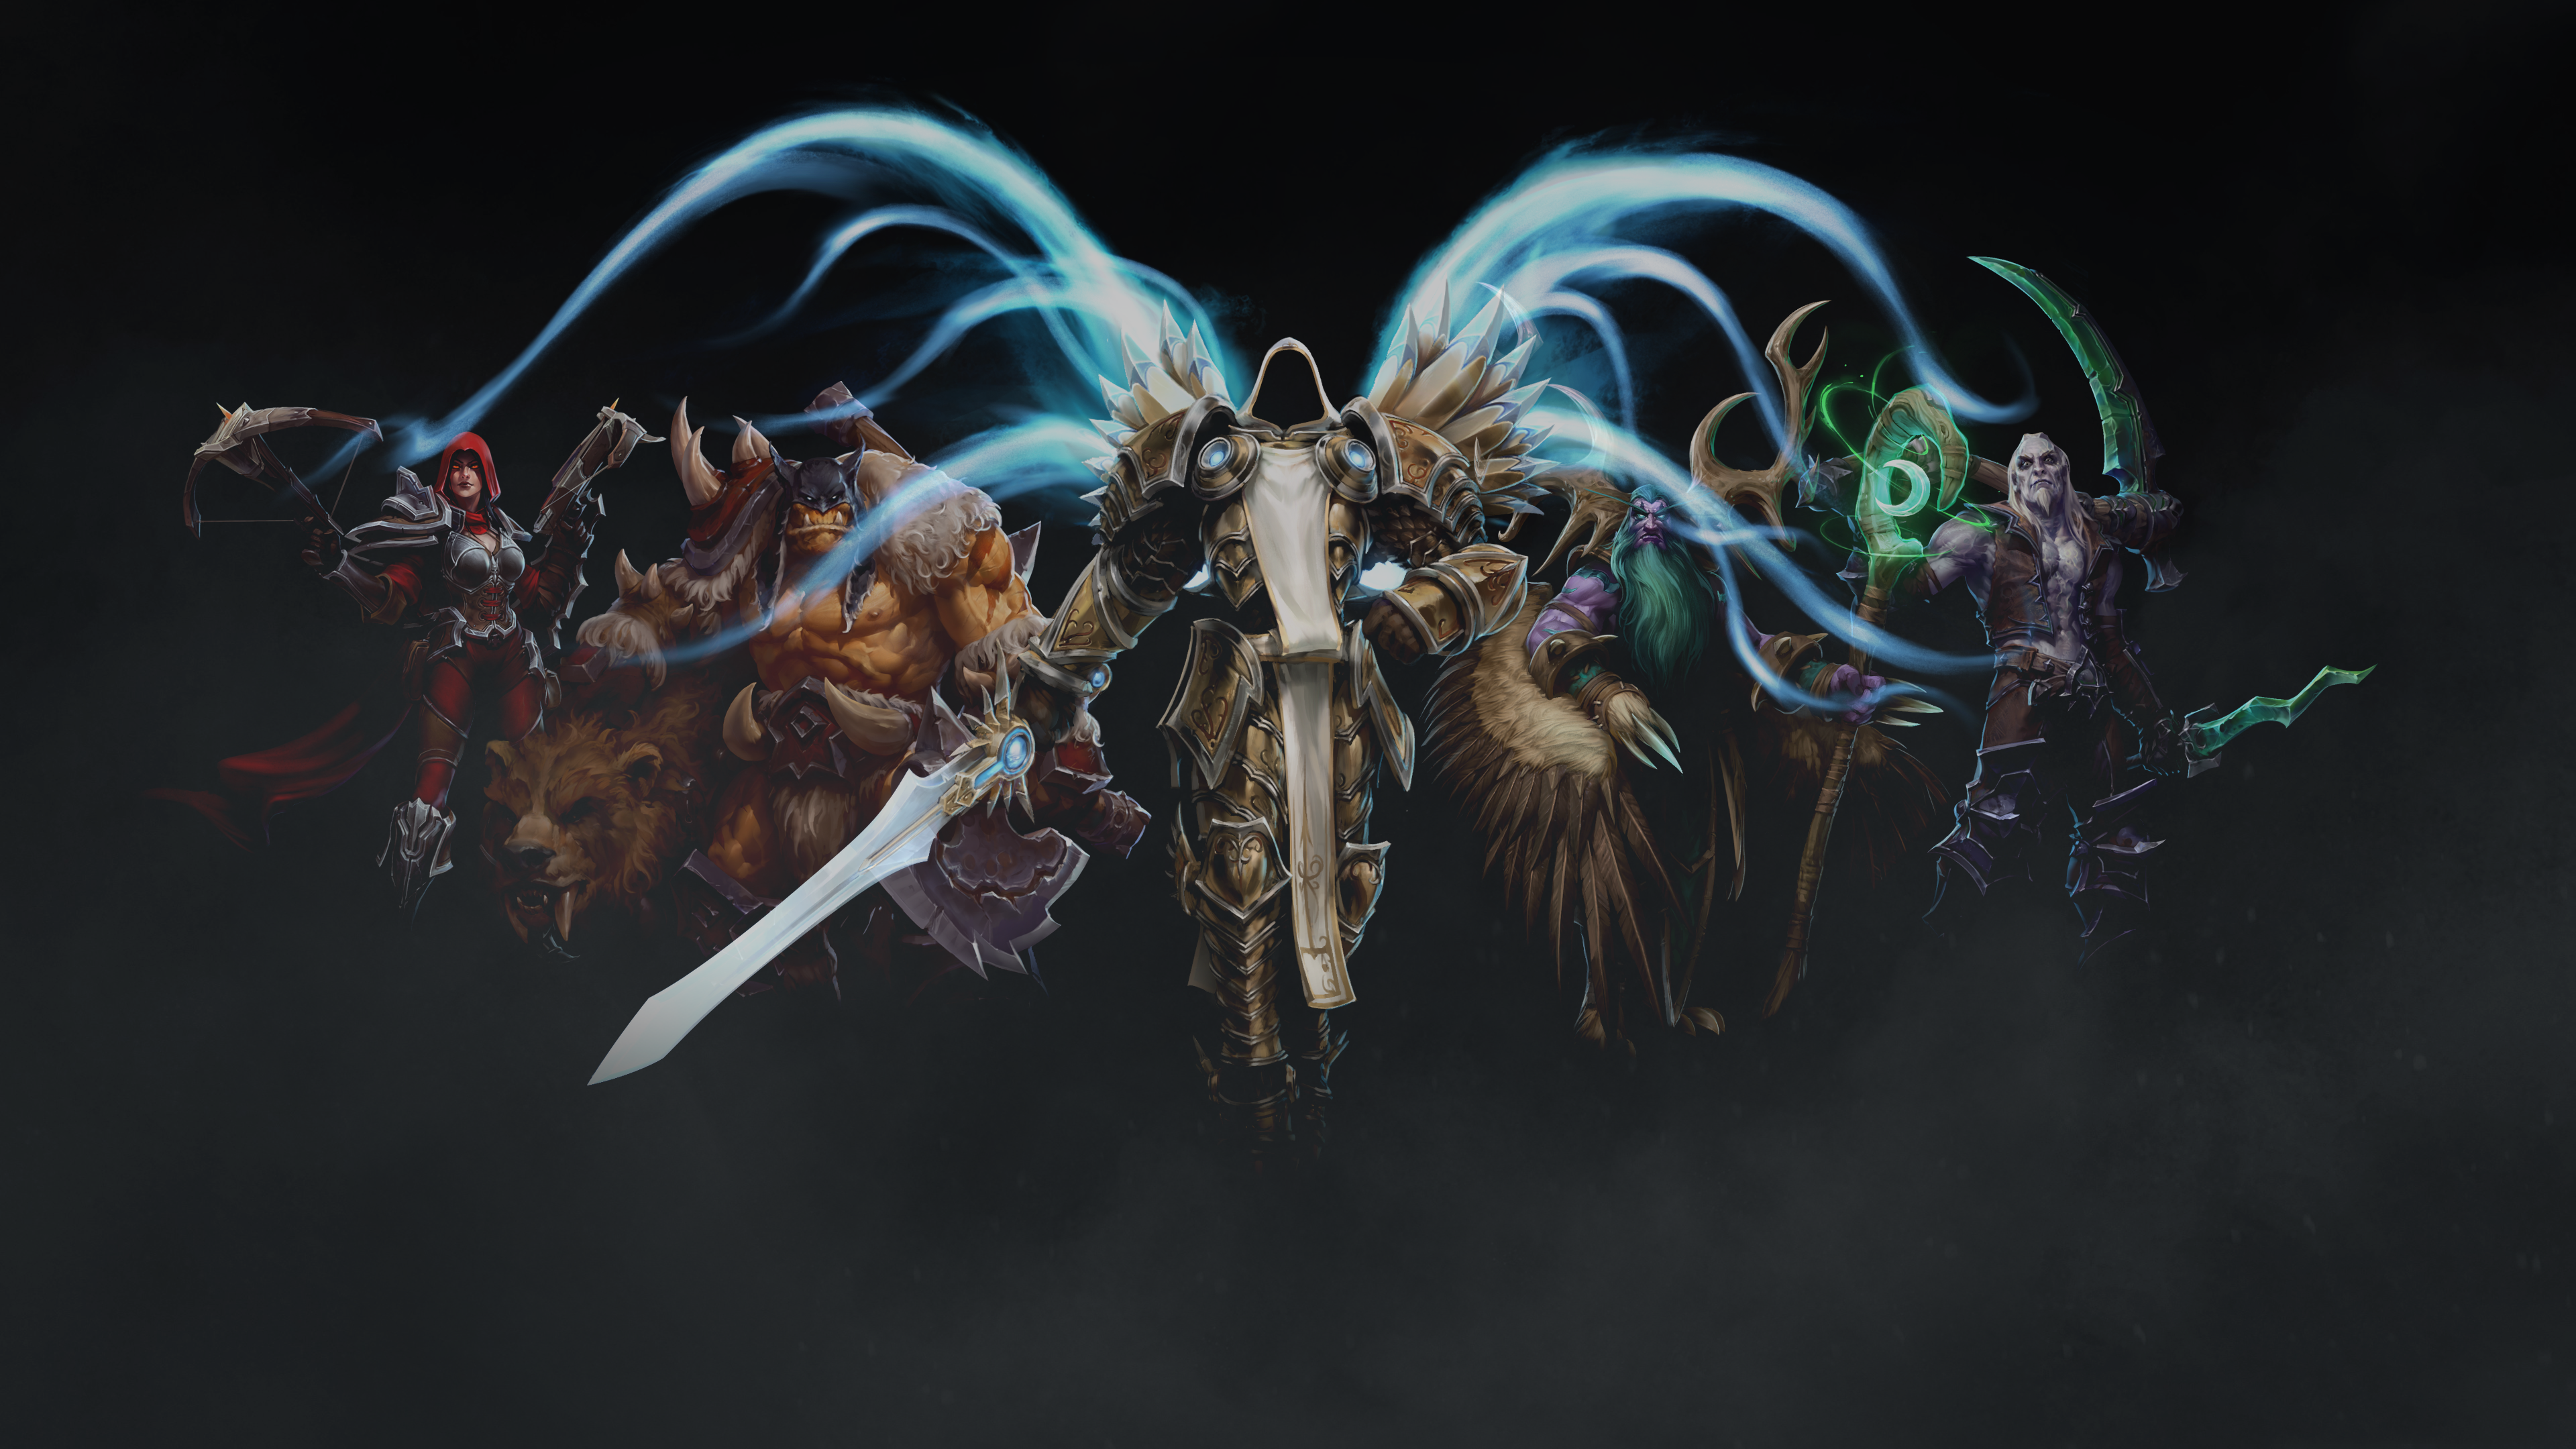 Download 3840x2160 Heroes Of The Storm, Tyrael, Rexxar, Malfurion, Valla Wallpaper for UHD TV